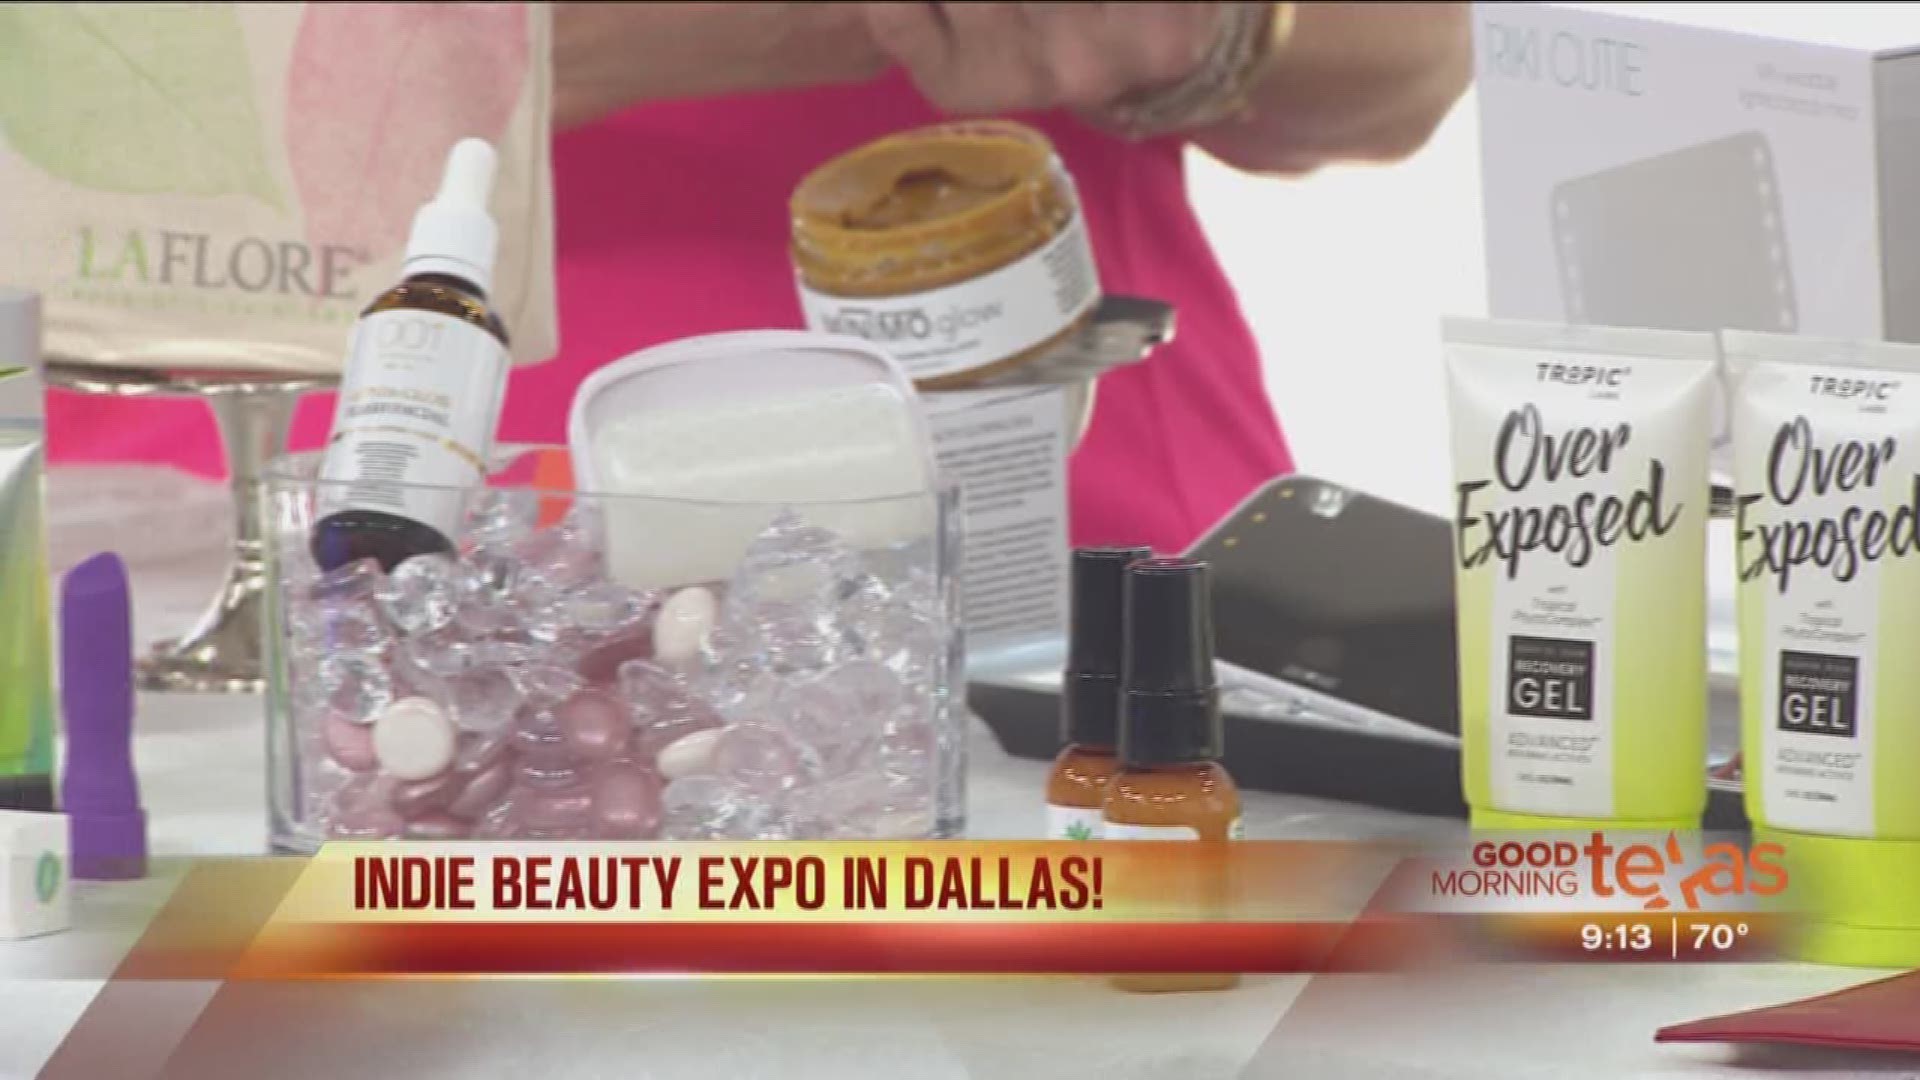 Go to indiebeautyexpo.com for more information